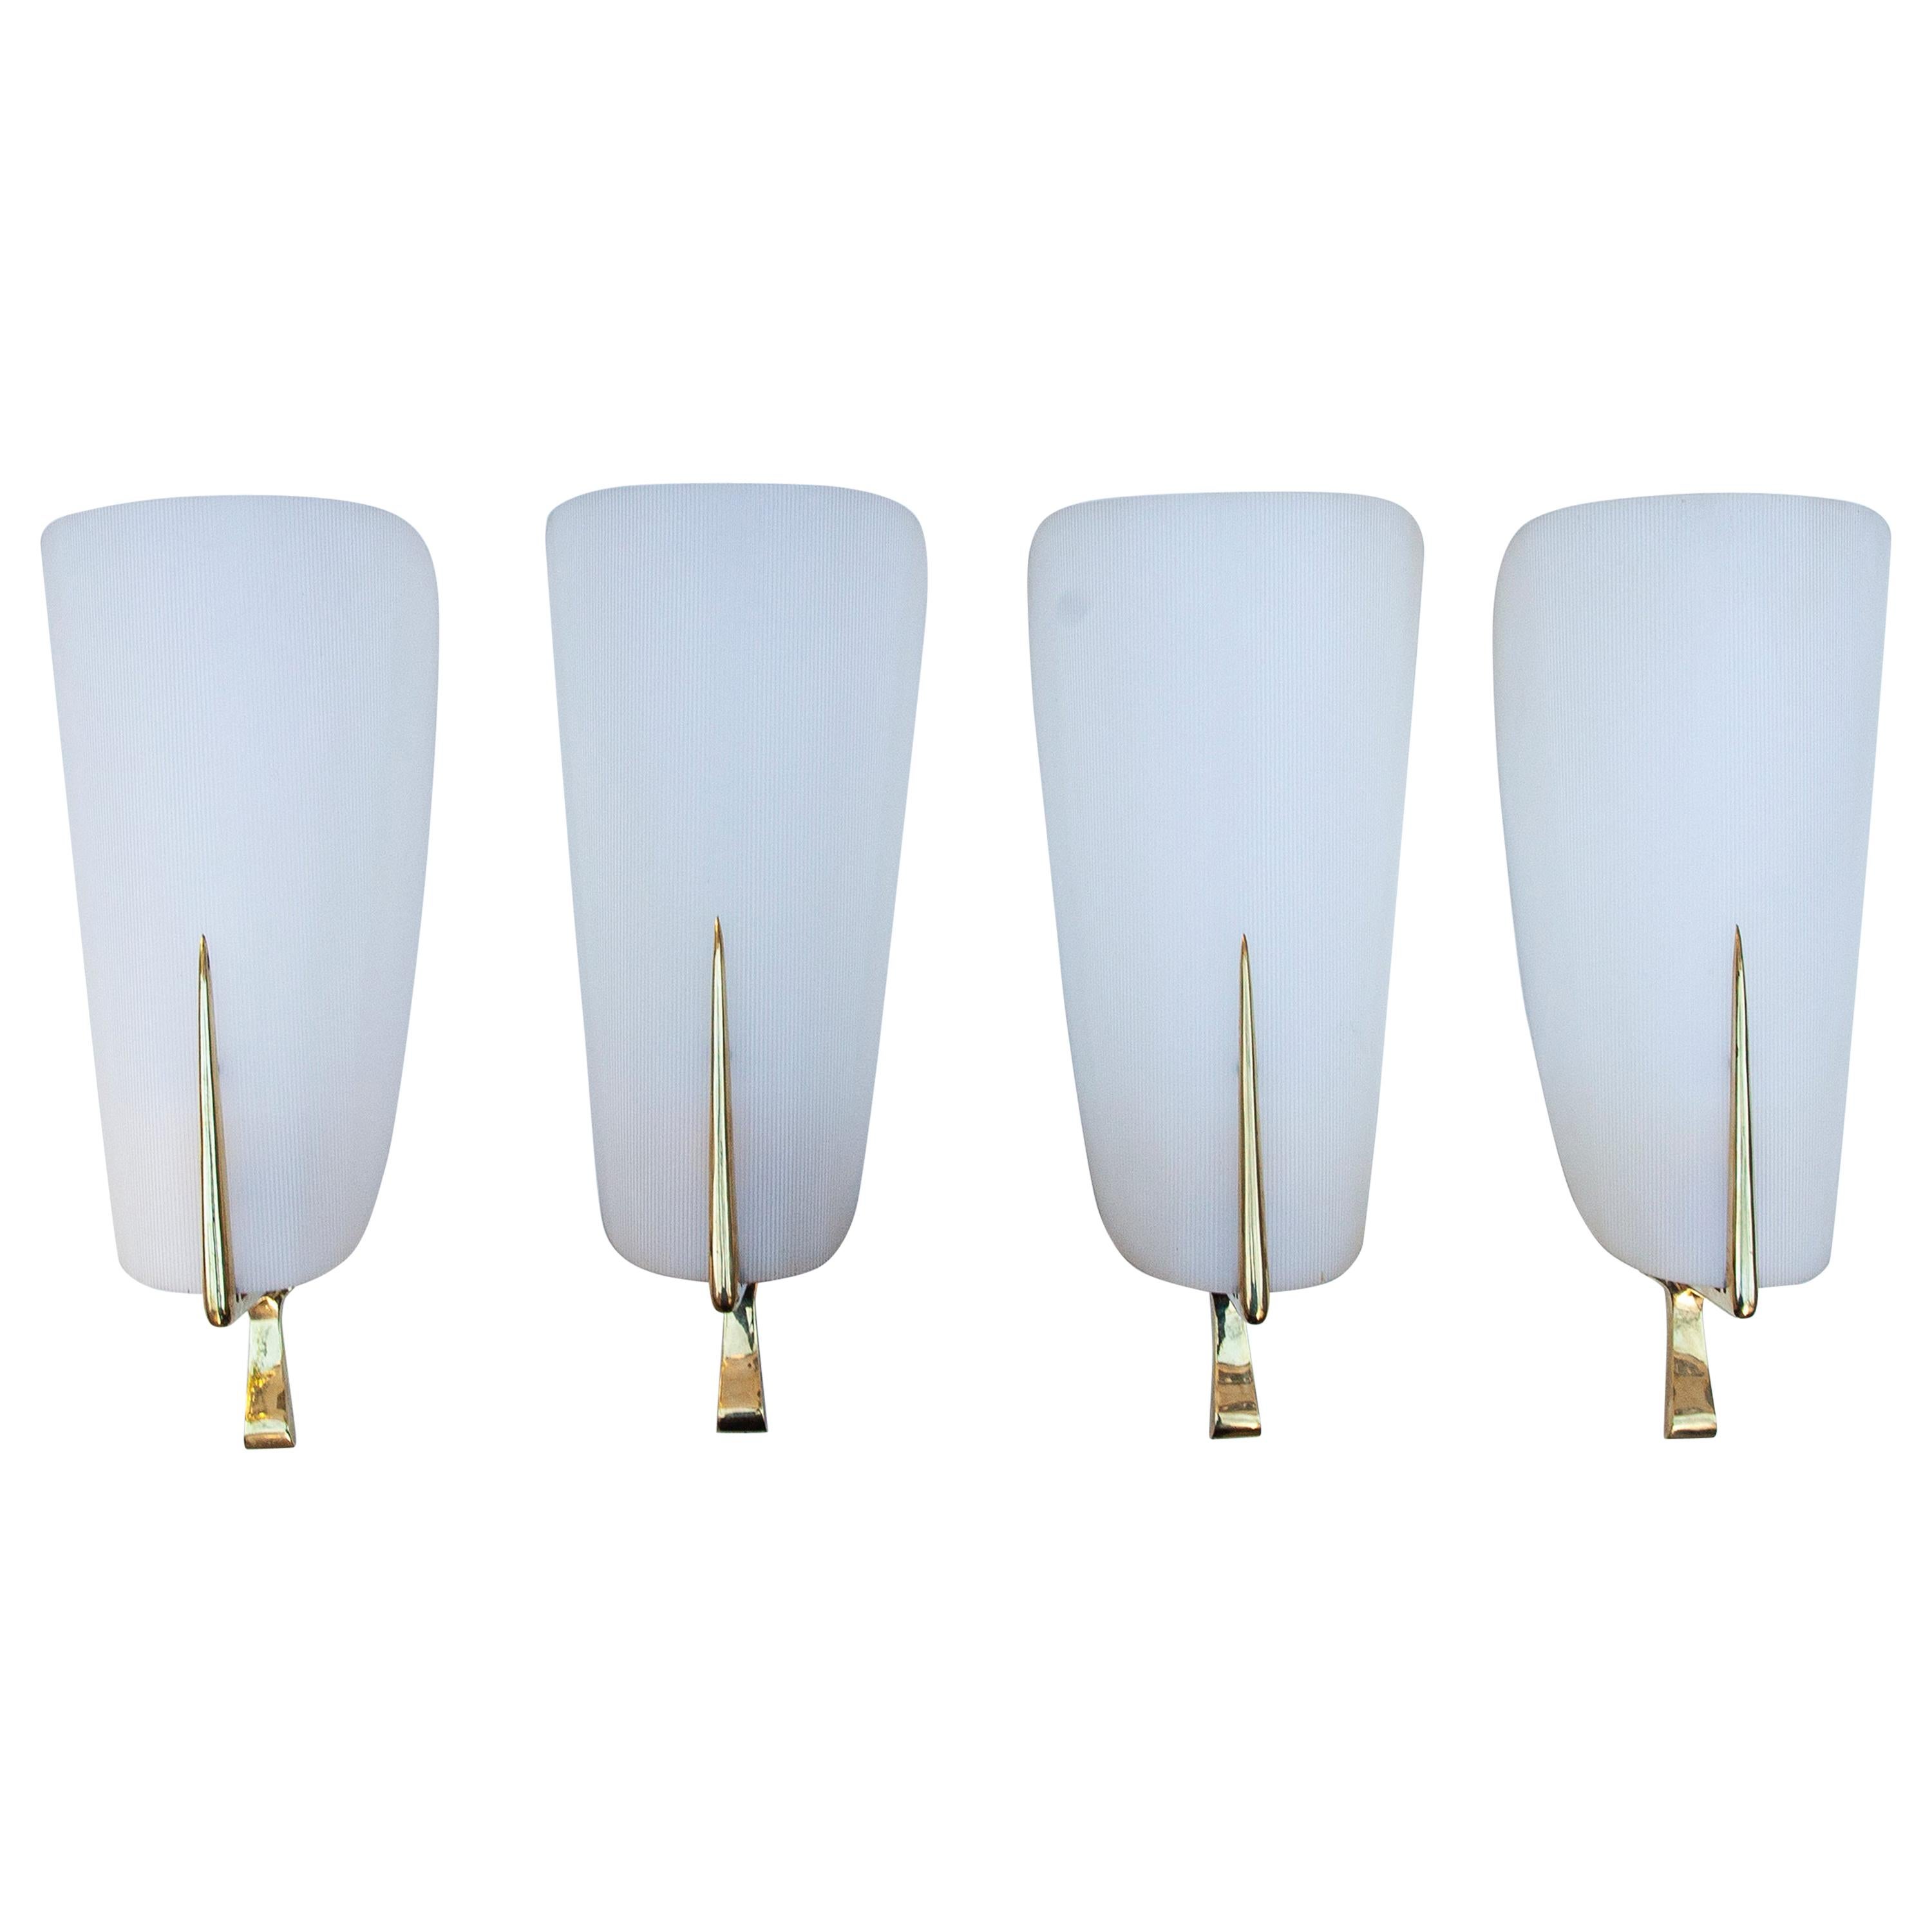 Maison Arlus Brass Perspex Wall Sconces Lamp Set of 4